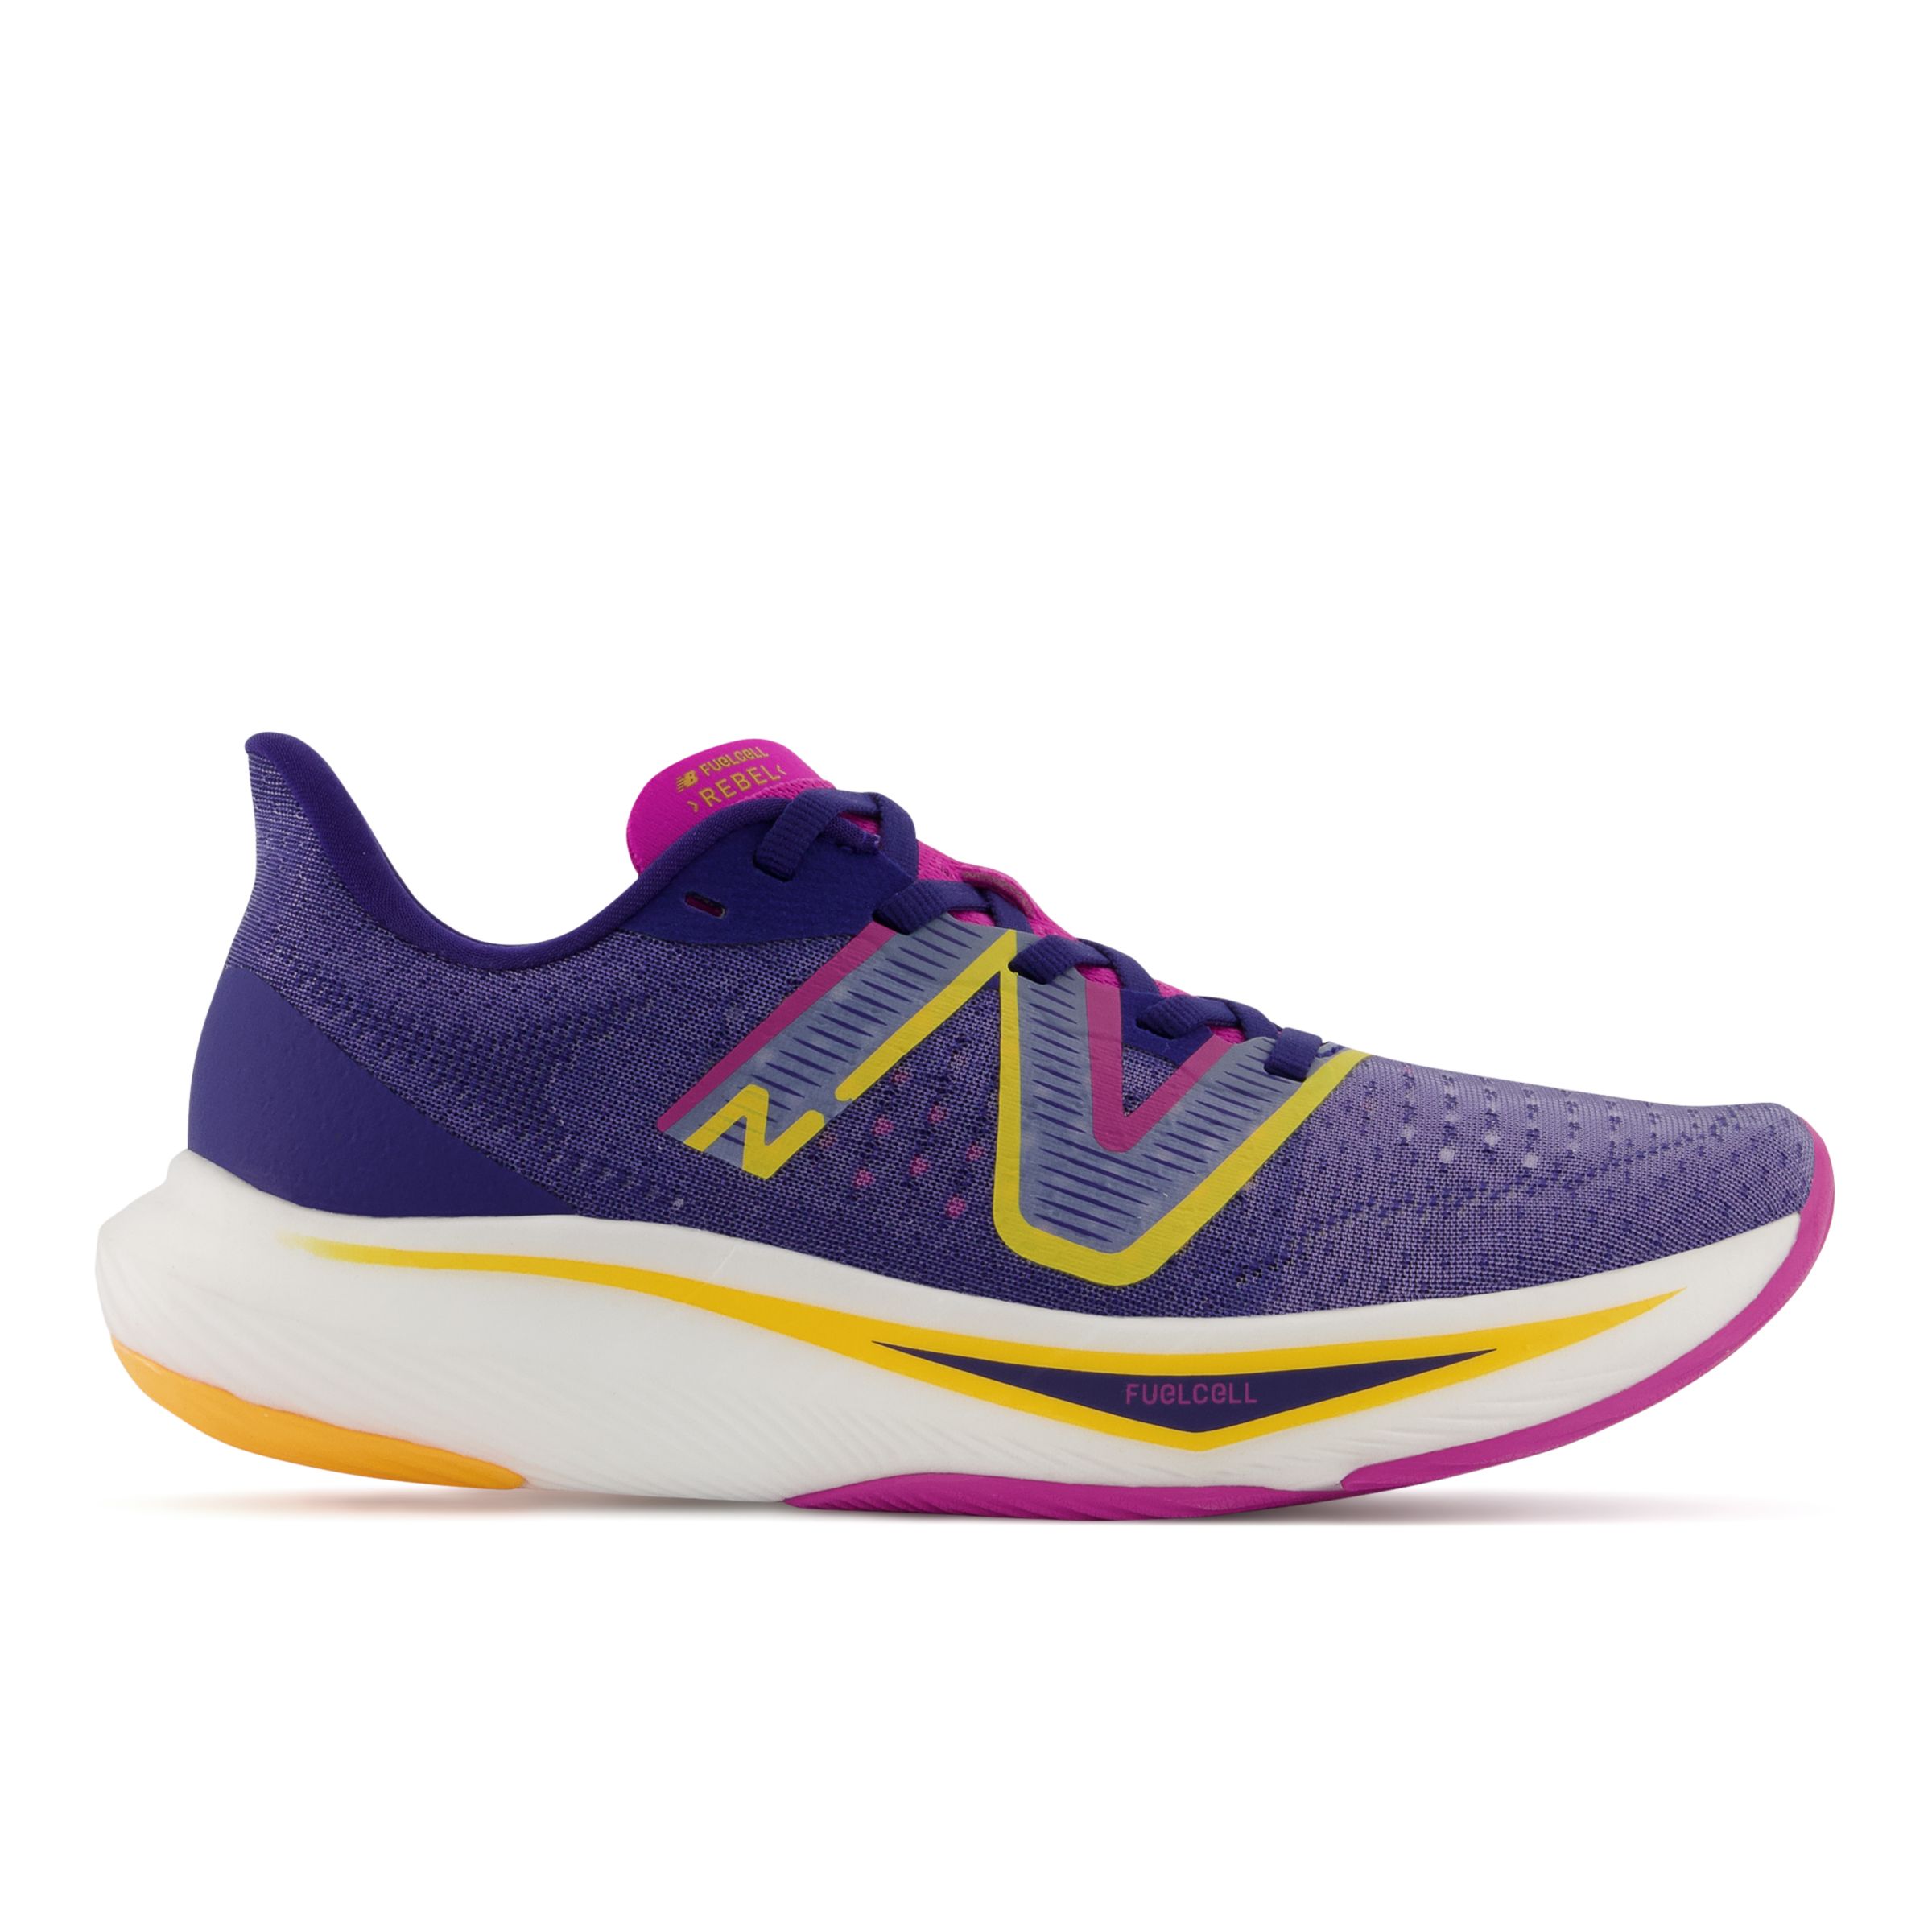 New Balance Women's FuelCell Rebel v3 Blue/Pink/Yellow - Blue/Pink/Yellow